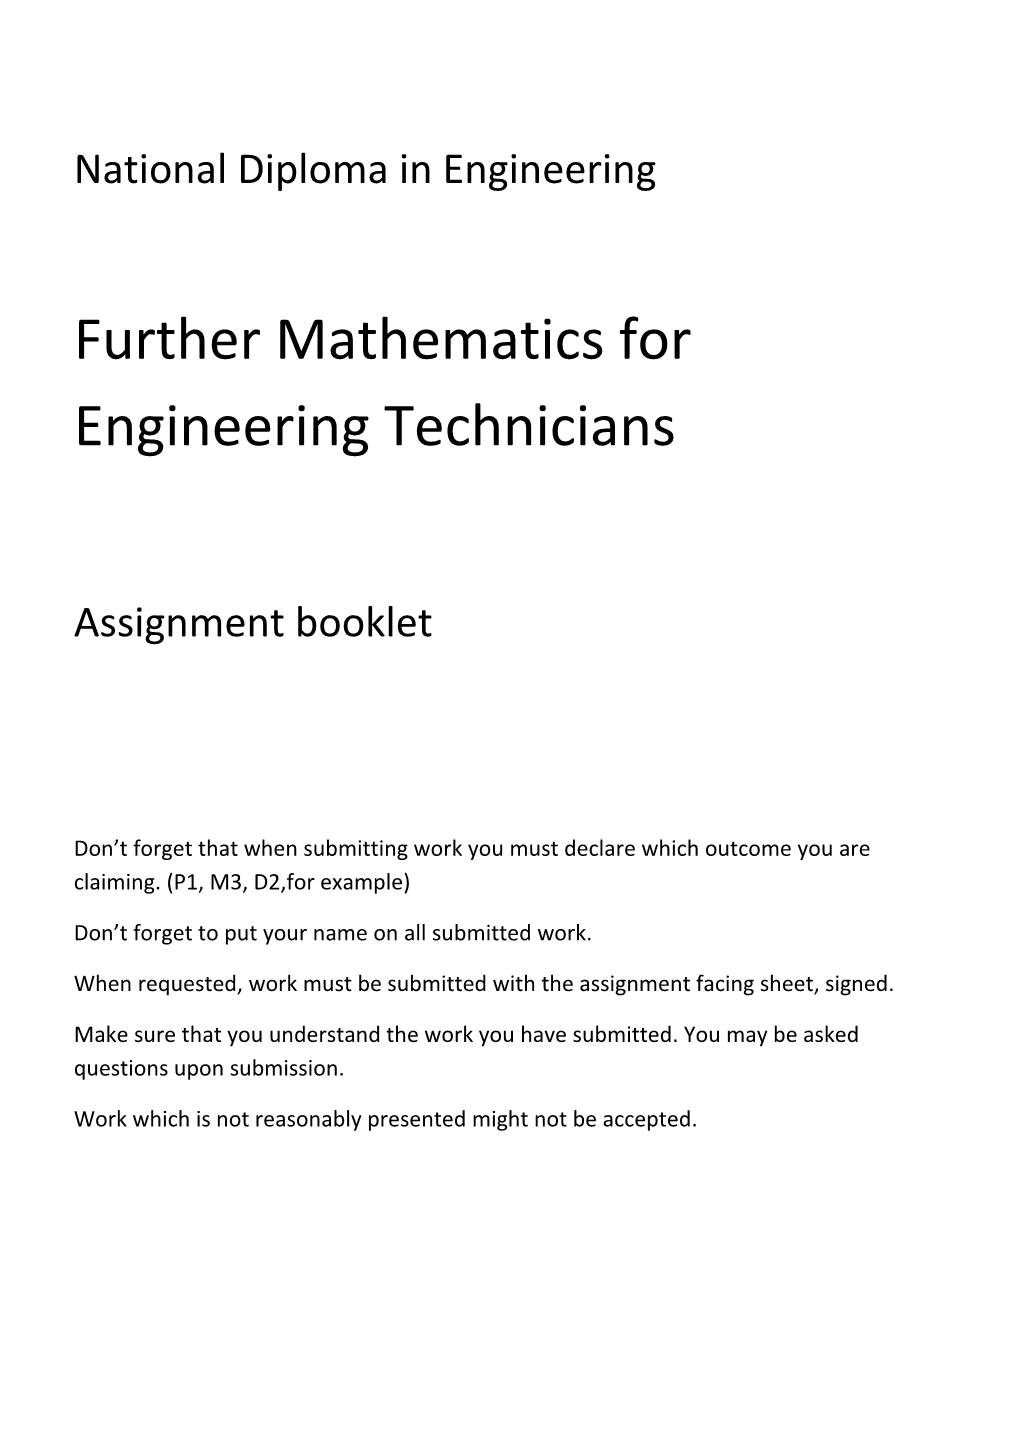 Further Mathematics for Engineering Technicians